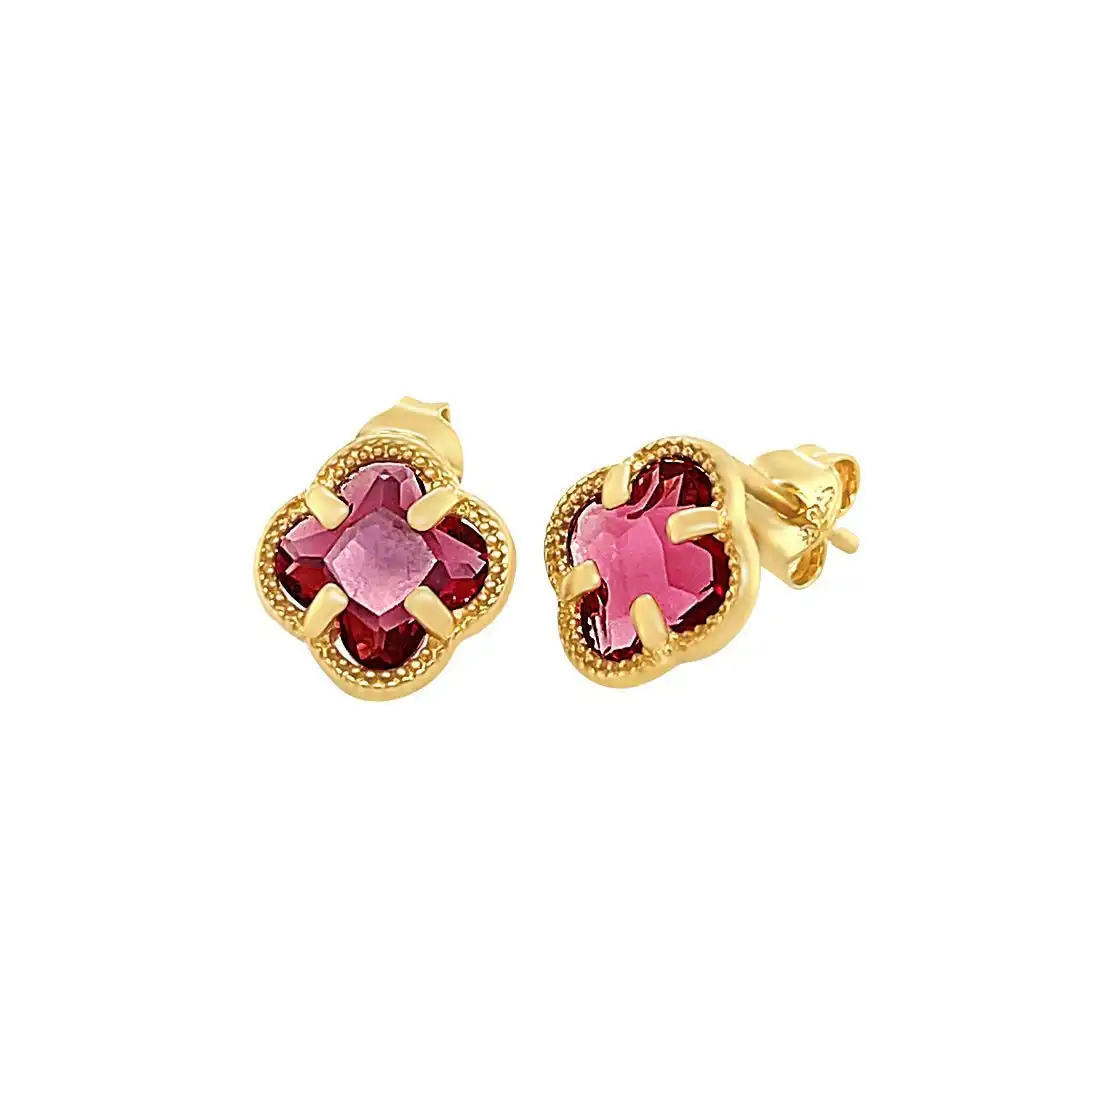 9ct Yellow Gold Silver Infused Red 4 Leaf Clover Stud Earrings